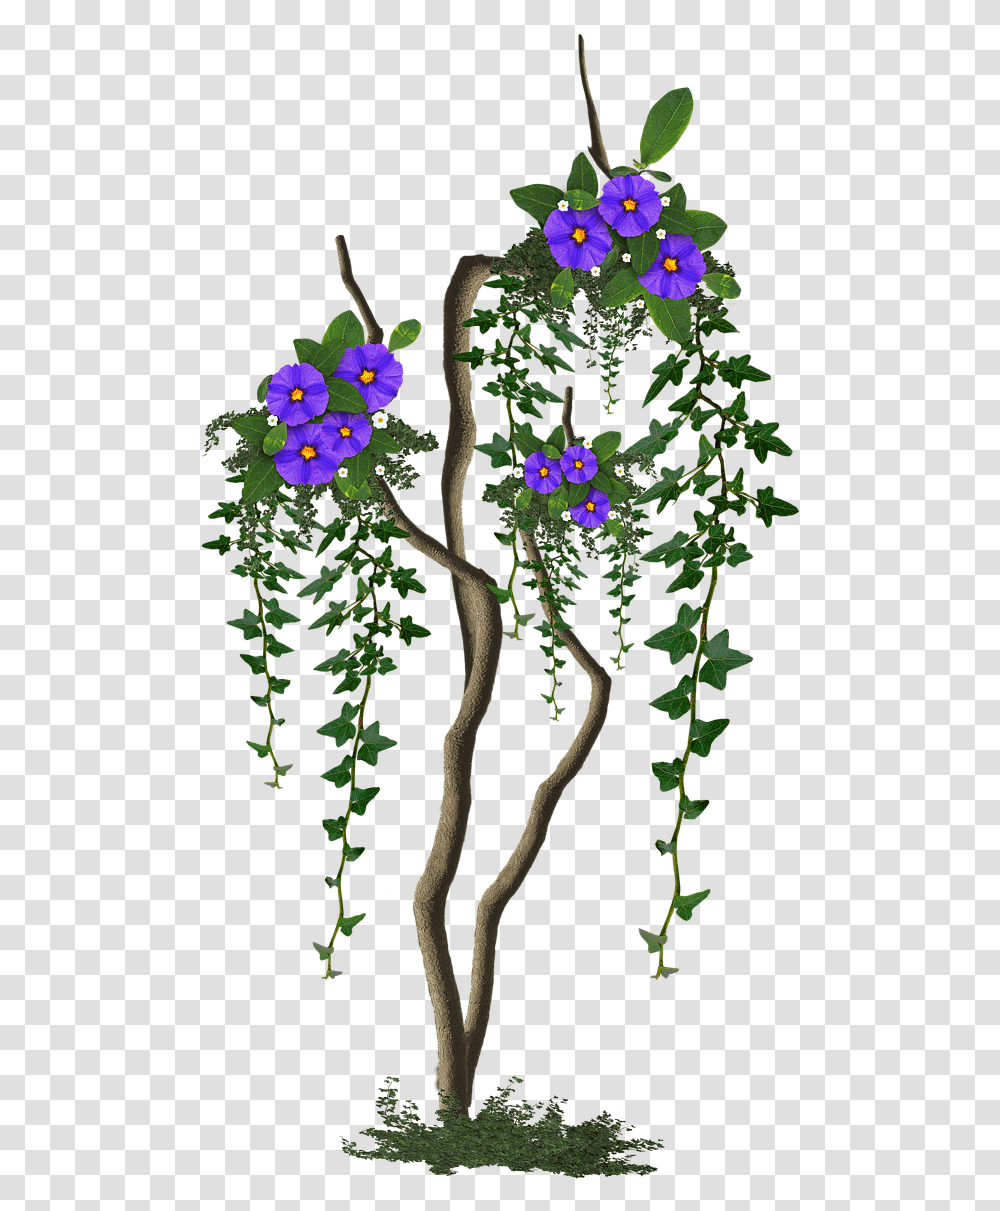 Image Cropped Tree With Flowers Tree Rosa Glauca, Pattern, Floral Design Transparent Png